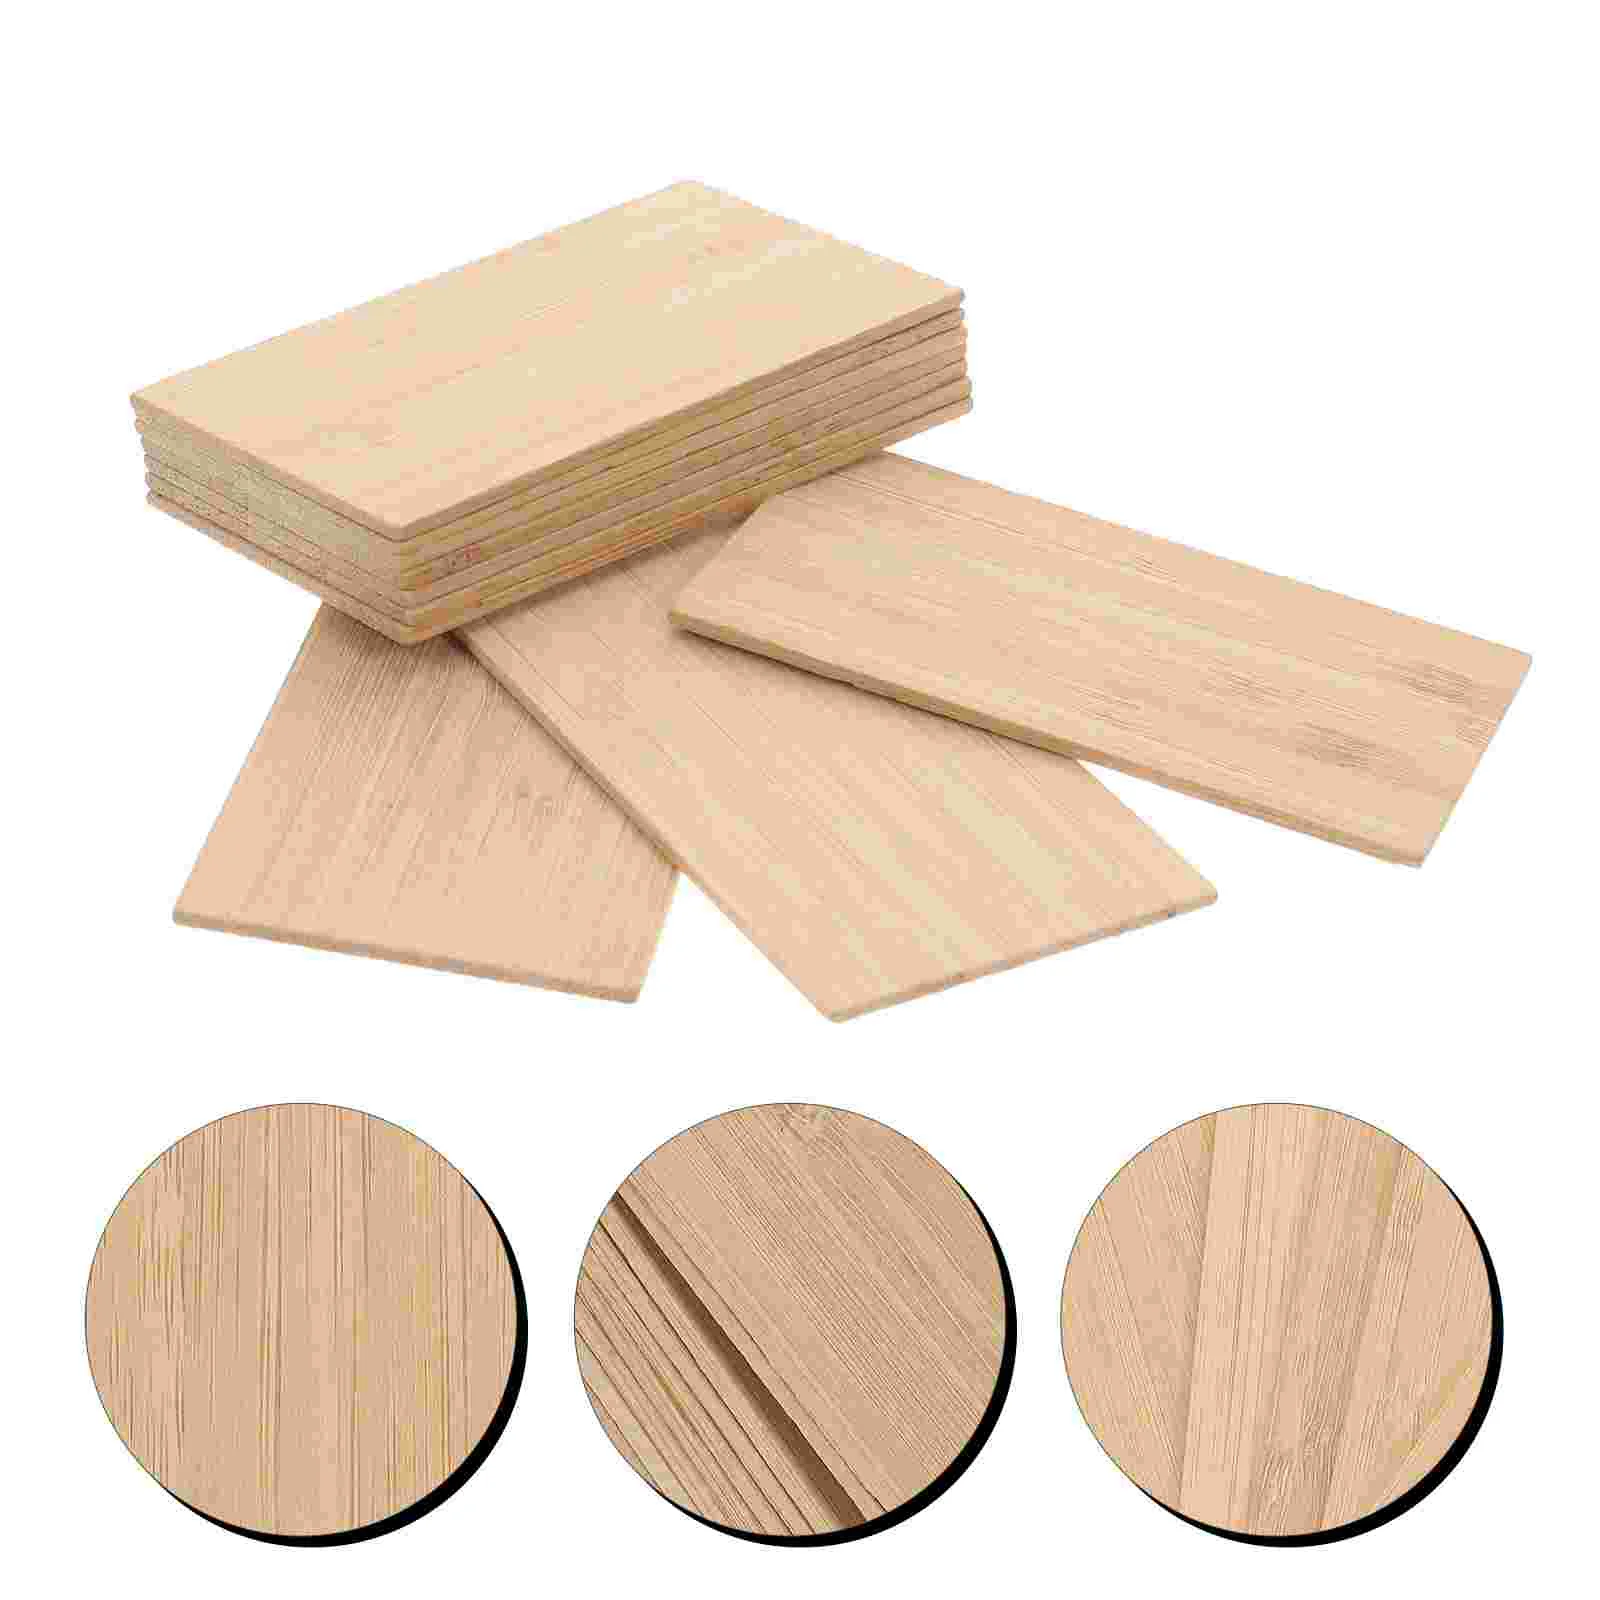 

10 Pcs Blank Gift Tags Bamboo Business Cards Wood Discs Rectangular Decor Wooden Shapes Chips DIY Cutouts